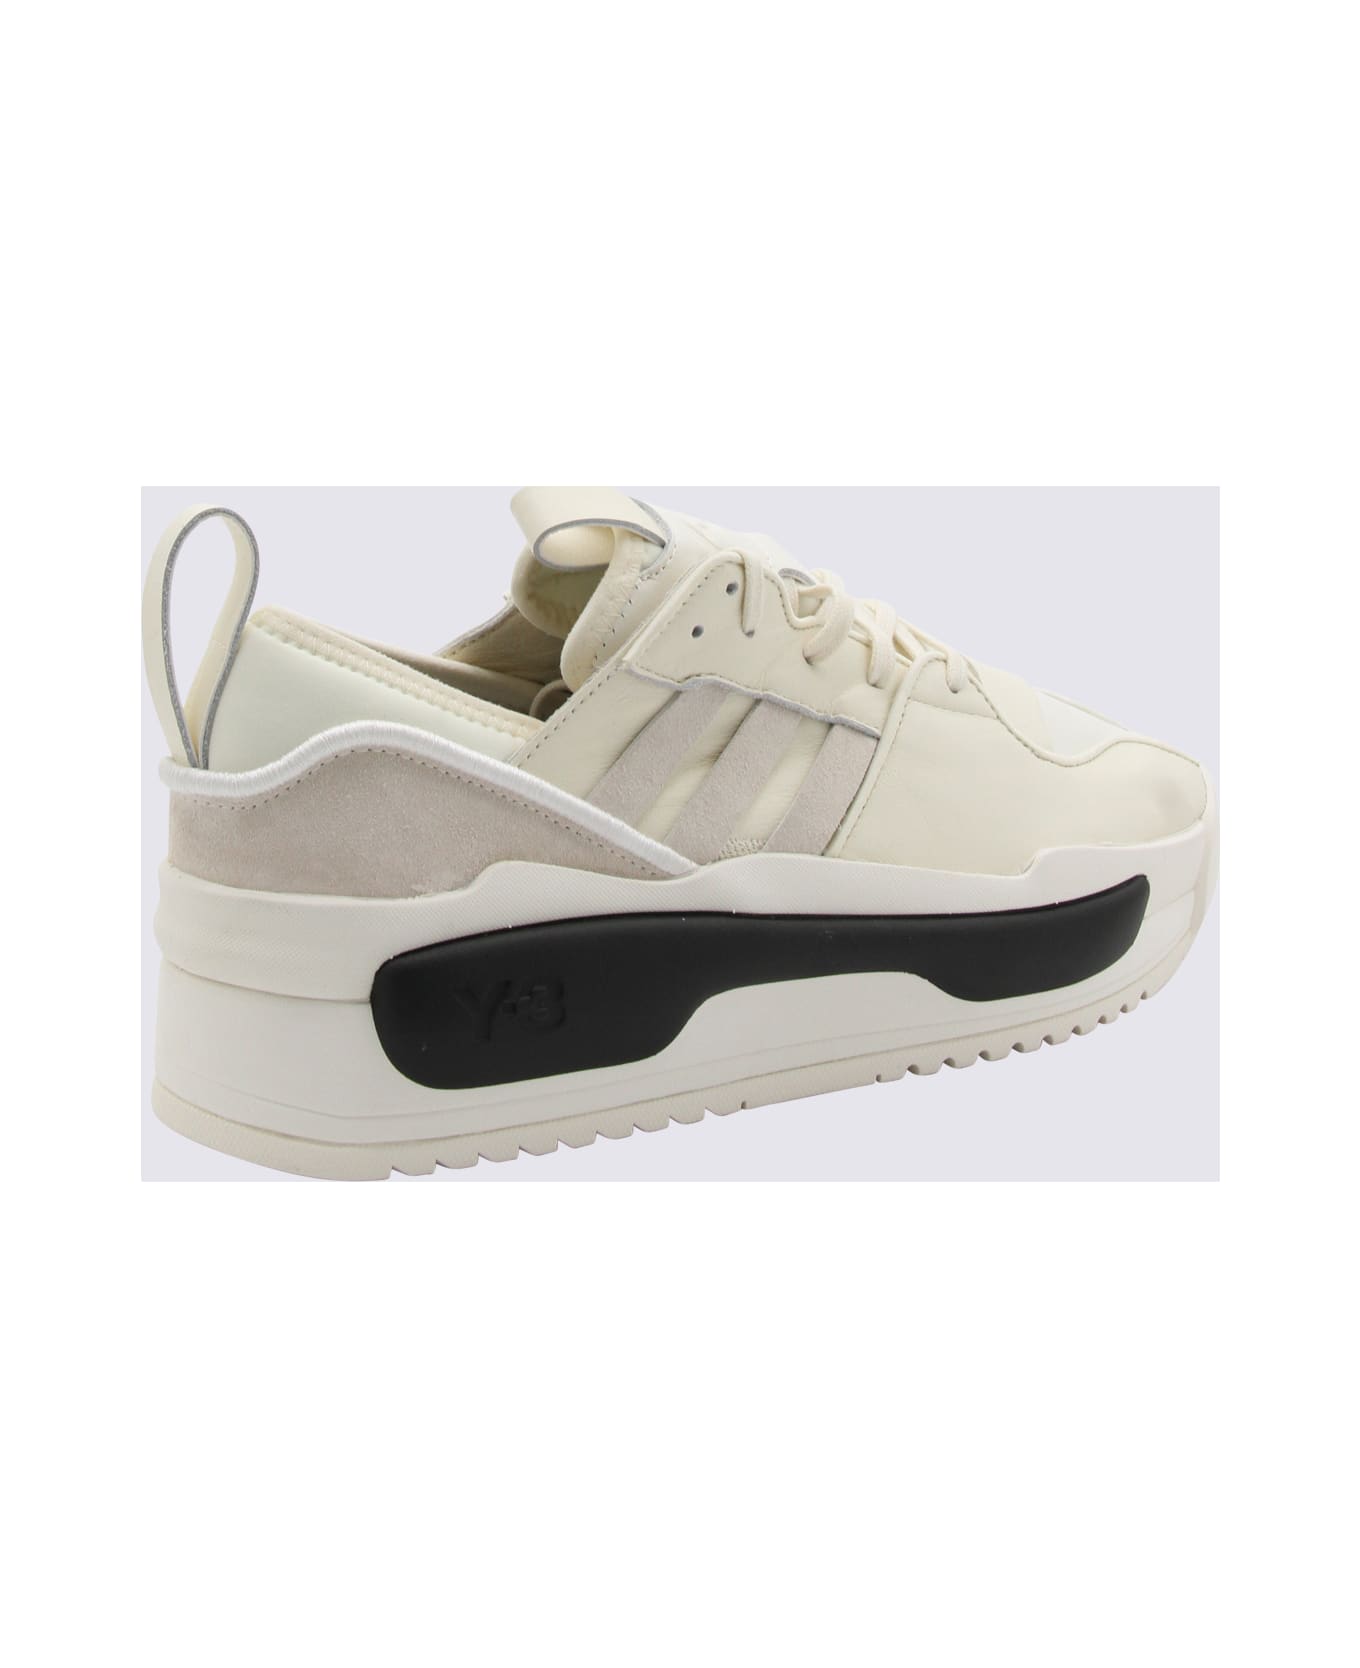 Y-3 Ivory Leather Rivalry Sneakers - CREAM WHITE/OFF WHITE/BLACK スニーカー